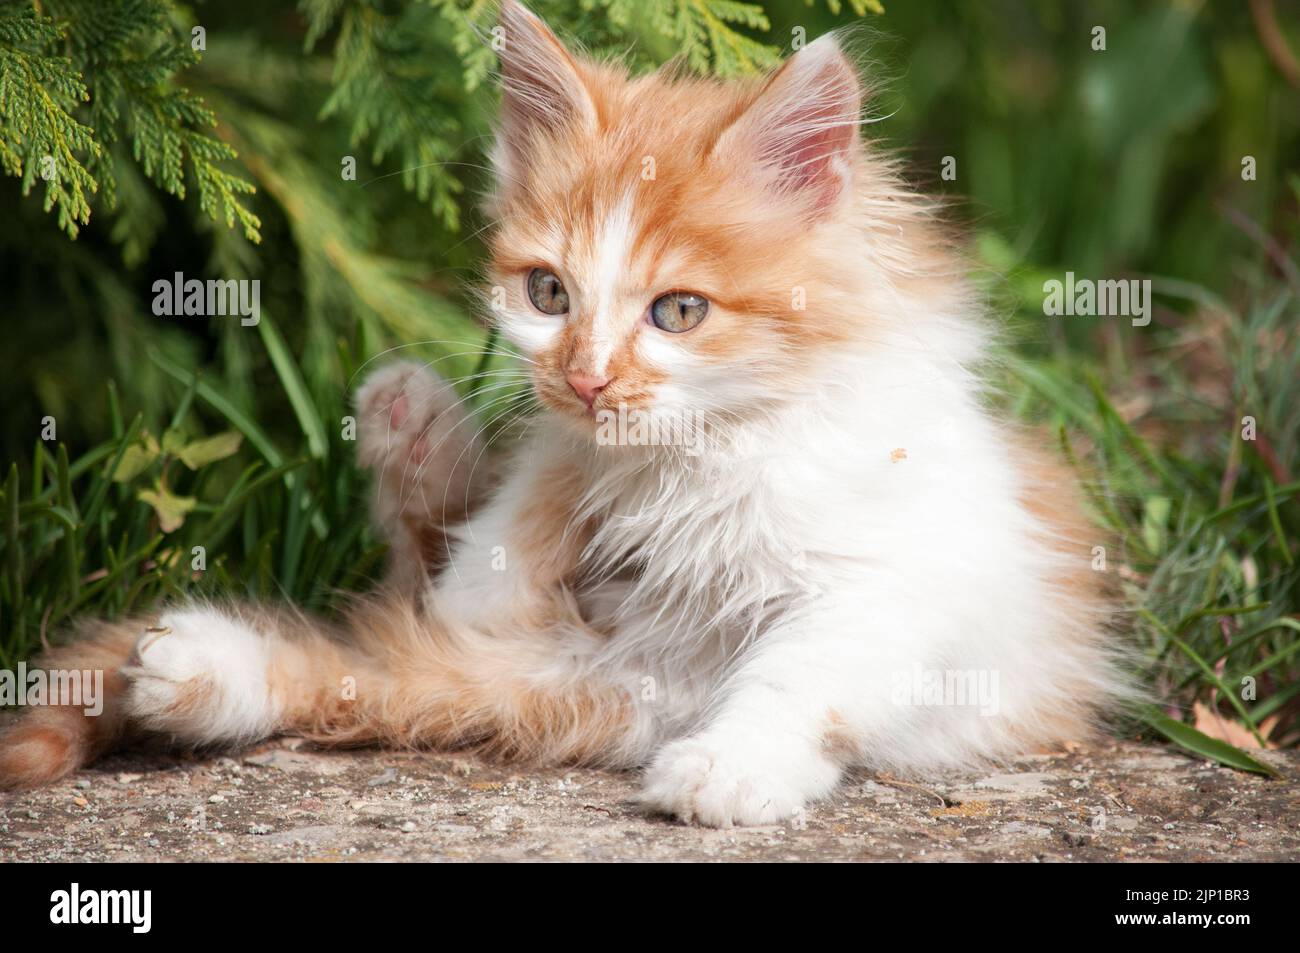 A little orange and white kitten stands on a path in the garden and looks at the camera Stock Photo